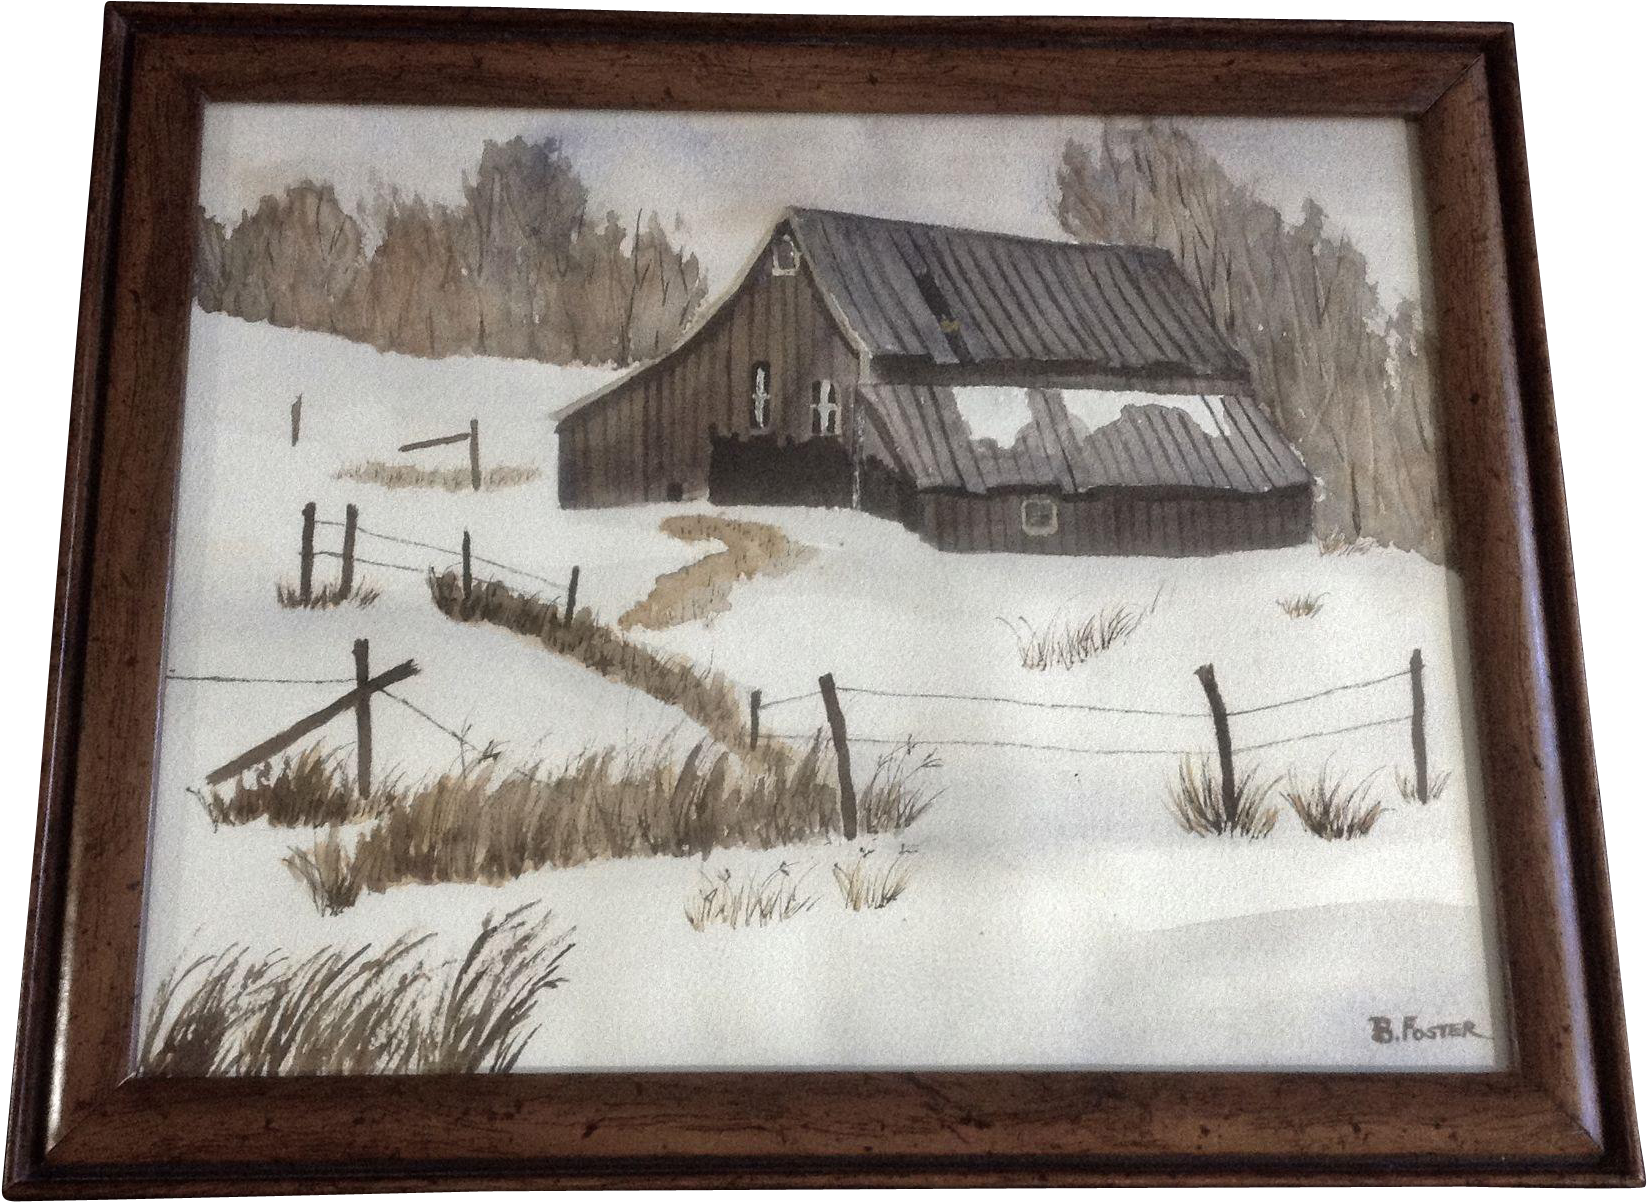 A Old Barn Sits Desolate On A Snowy Day - Watercolor Painting (1646x1646)